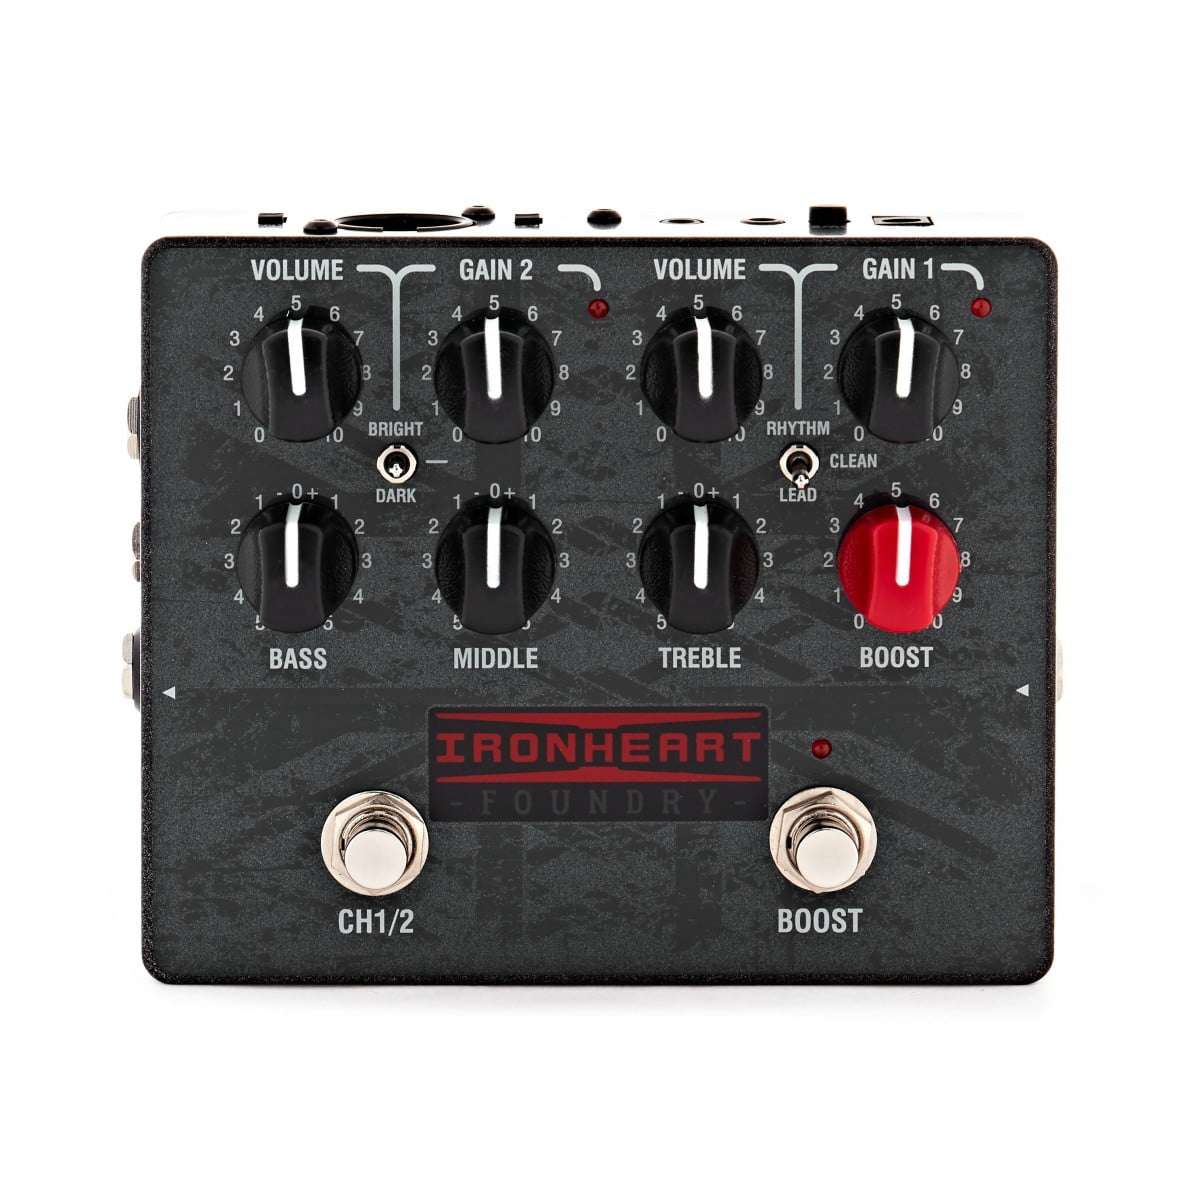 Laney Ironheart Loudpedal Foundry Series 60W Guitar / Amp Pedal - New Laney             EQ Overdrive  Distortion    Boost    Guitar Effect Pedal